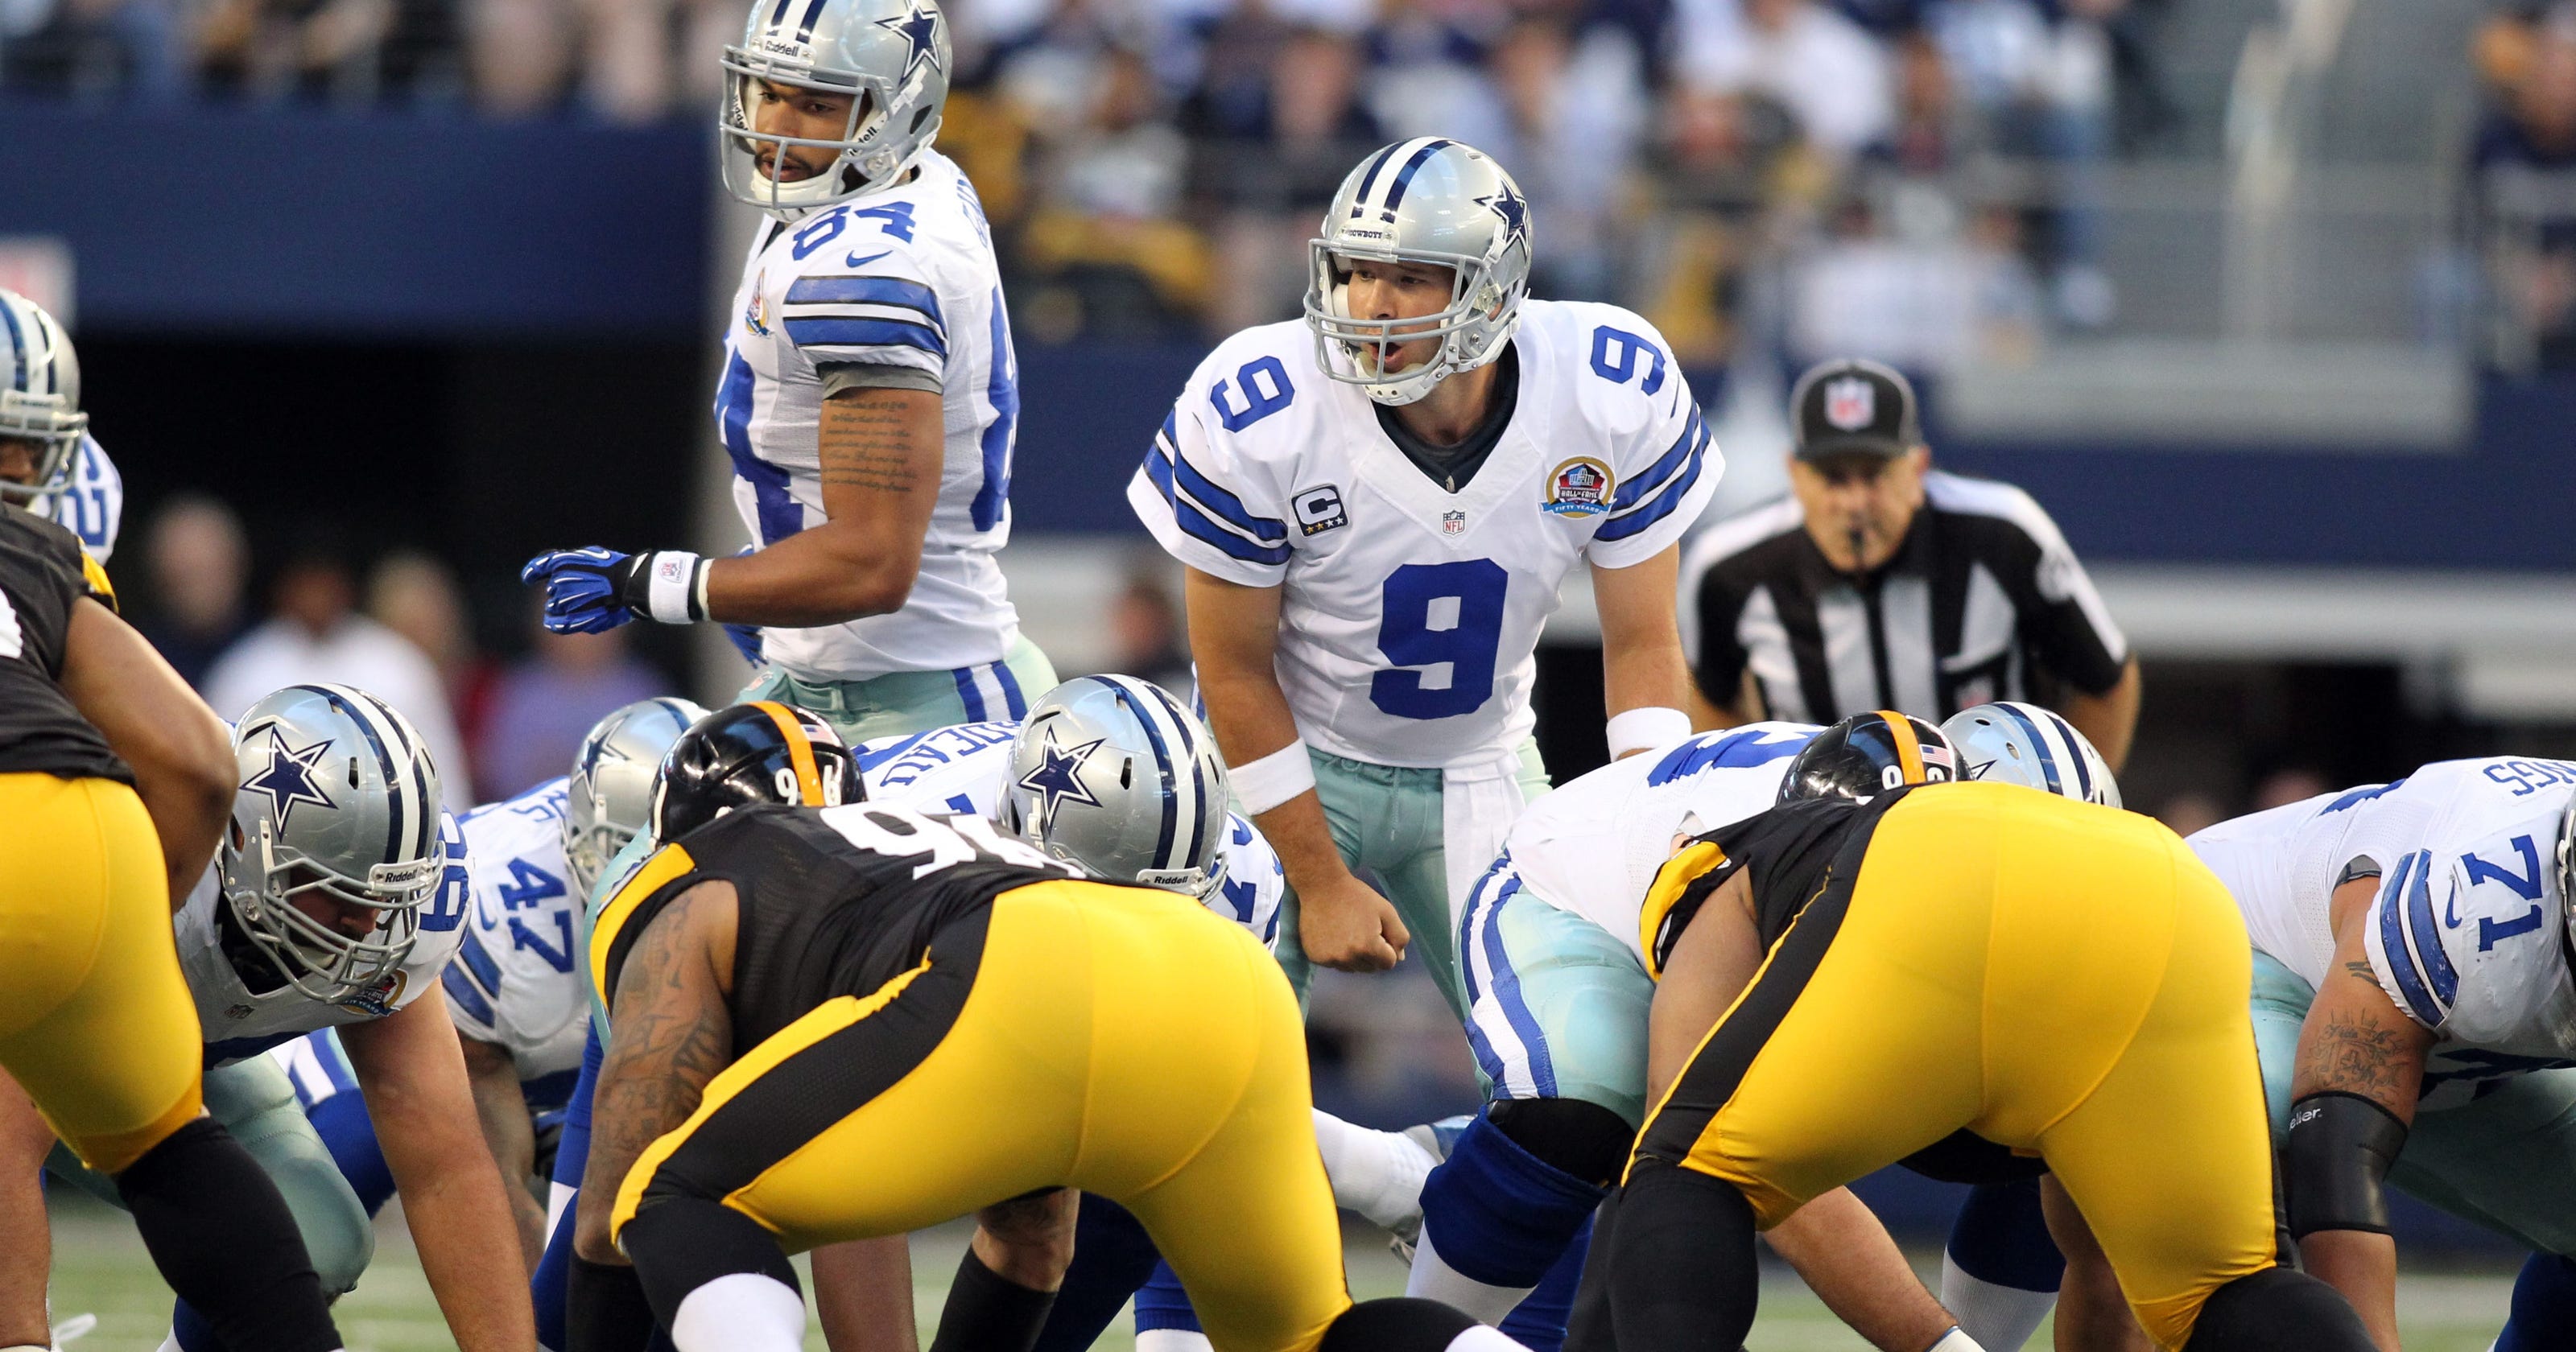 Winning in December quite the role reversal for Cowboys